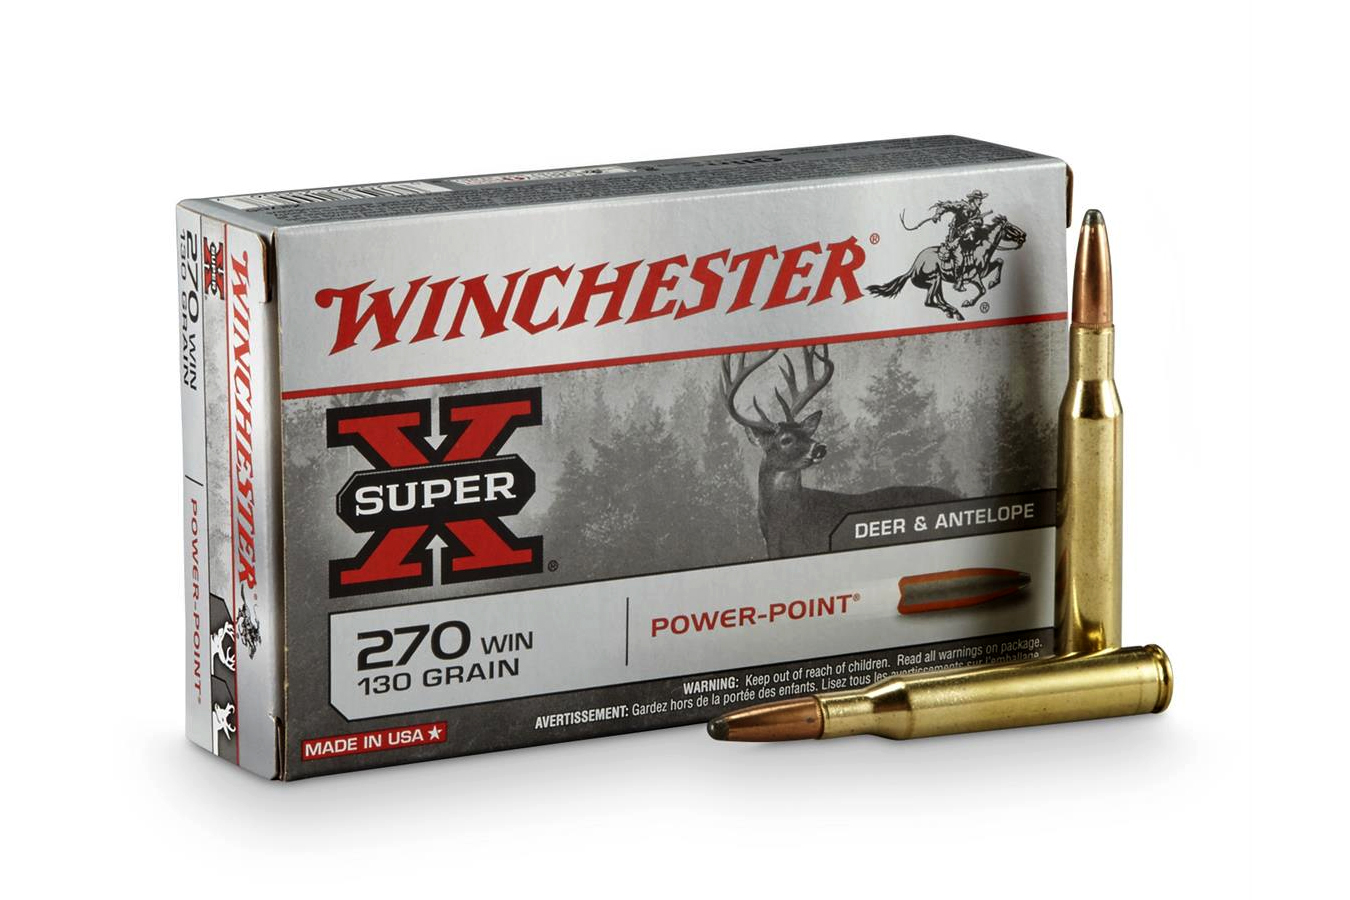 WINCHESTER AMMO 270 WIN 130 GR POWER POINT SUPER-X